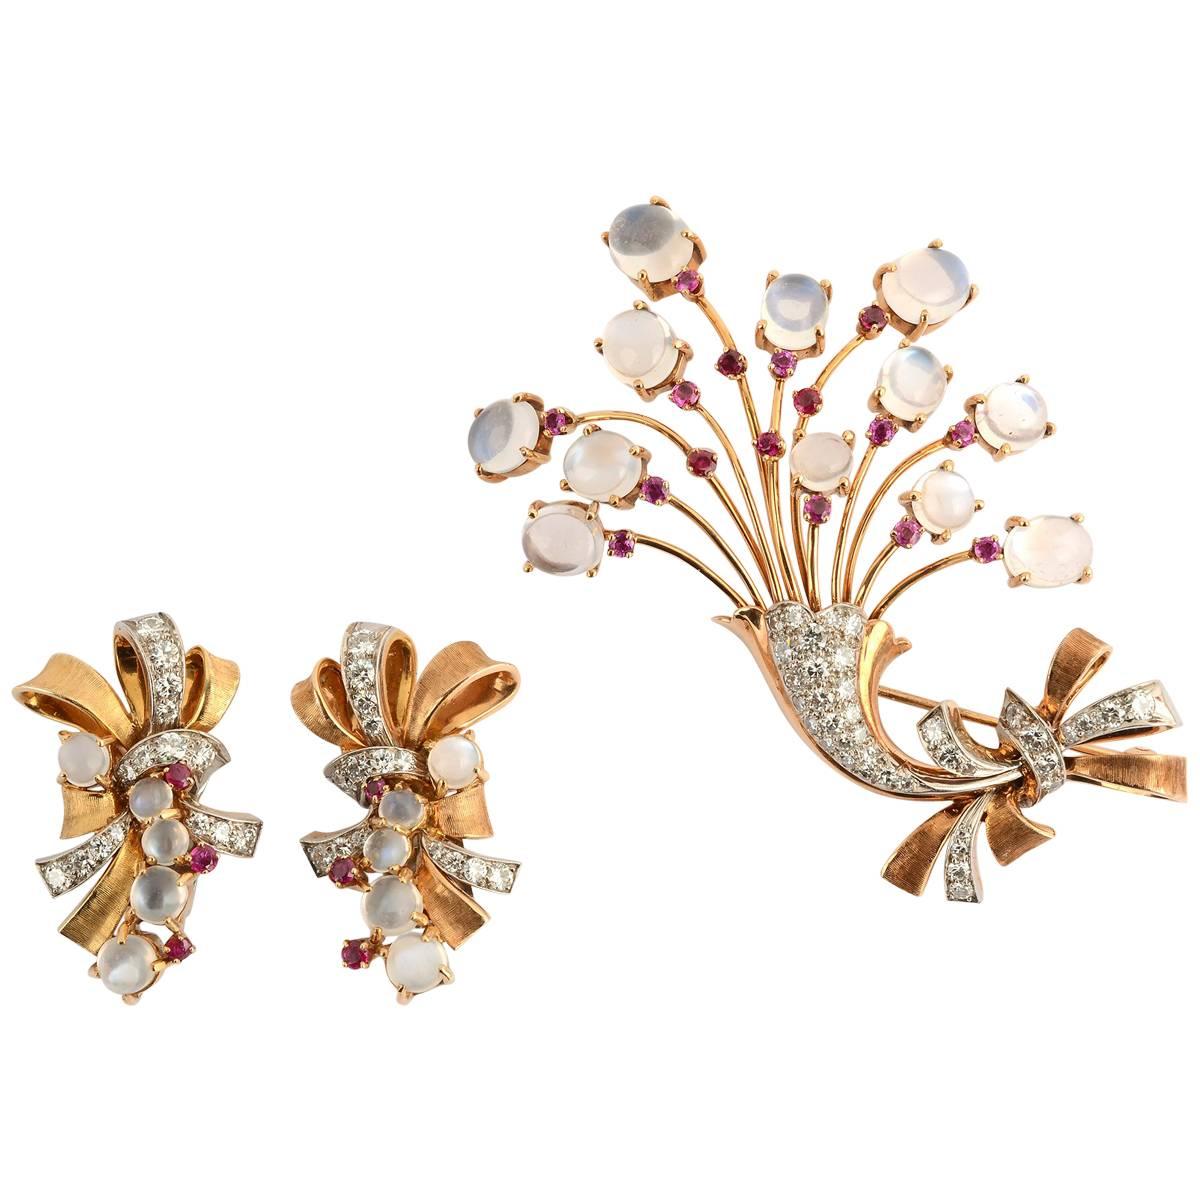 Retro Floral Brooch and Earrings